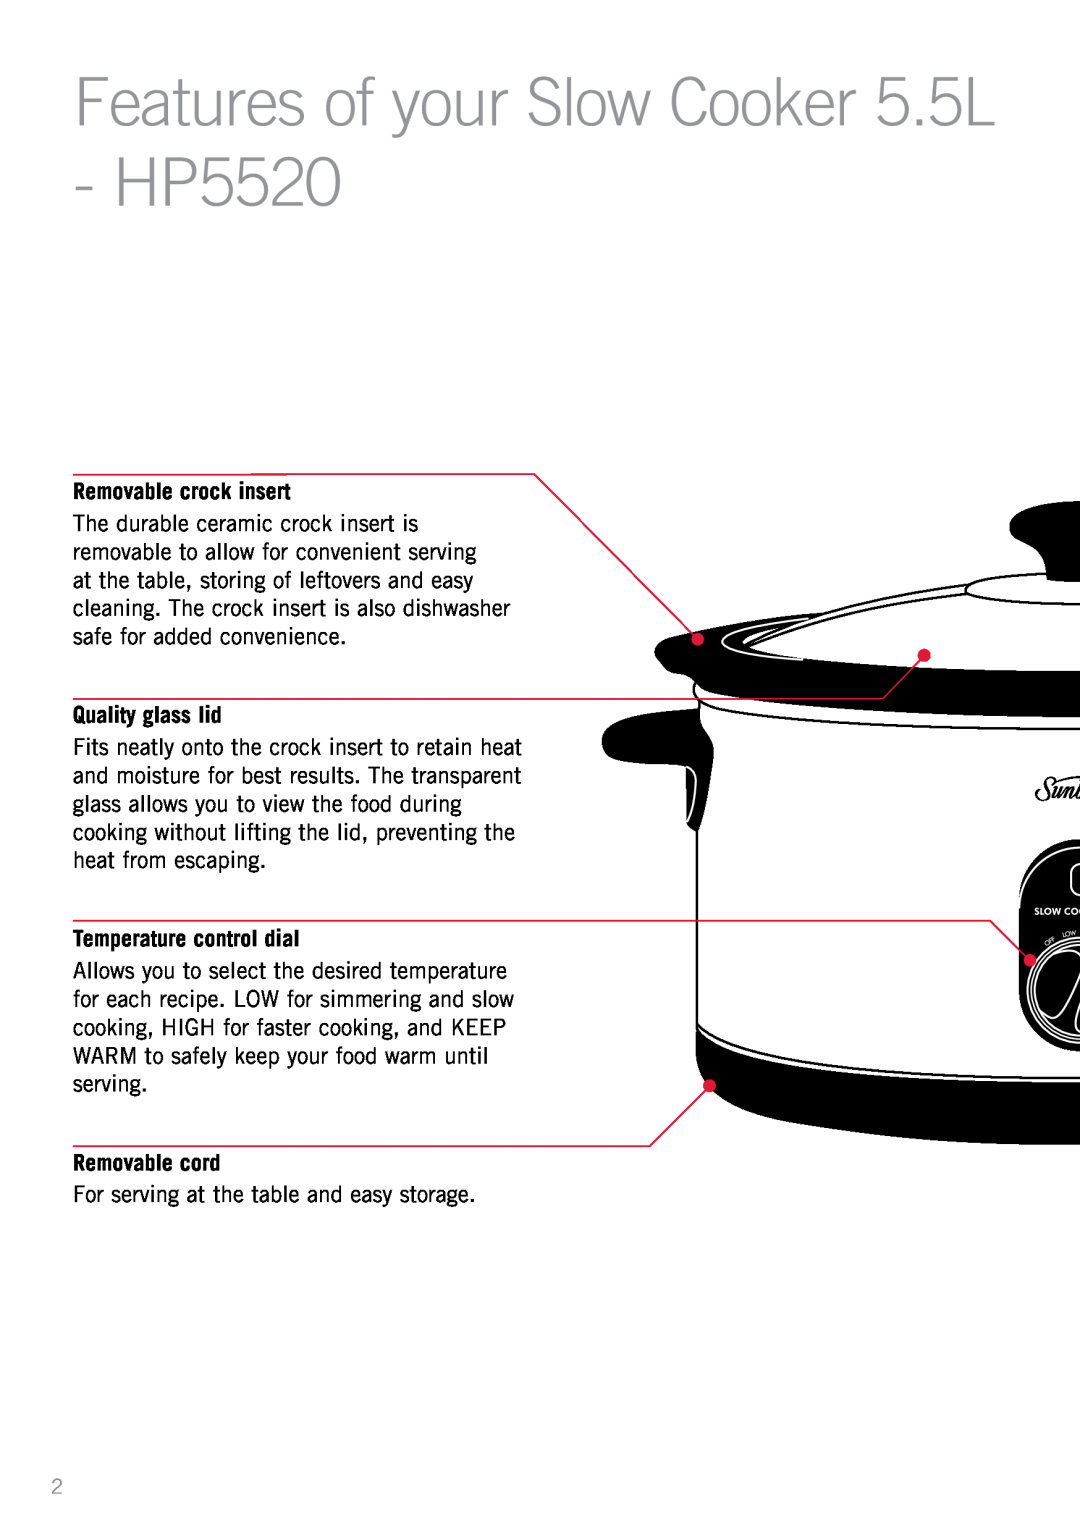 Sunbeam Features of your Slow Cooker 5.5L - HP5520, Removable crock insert, Quality glass lid, Temperature control dial 